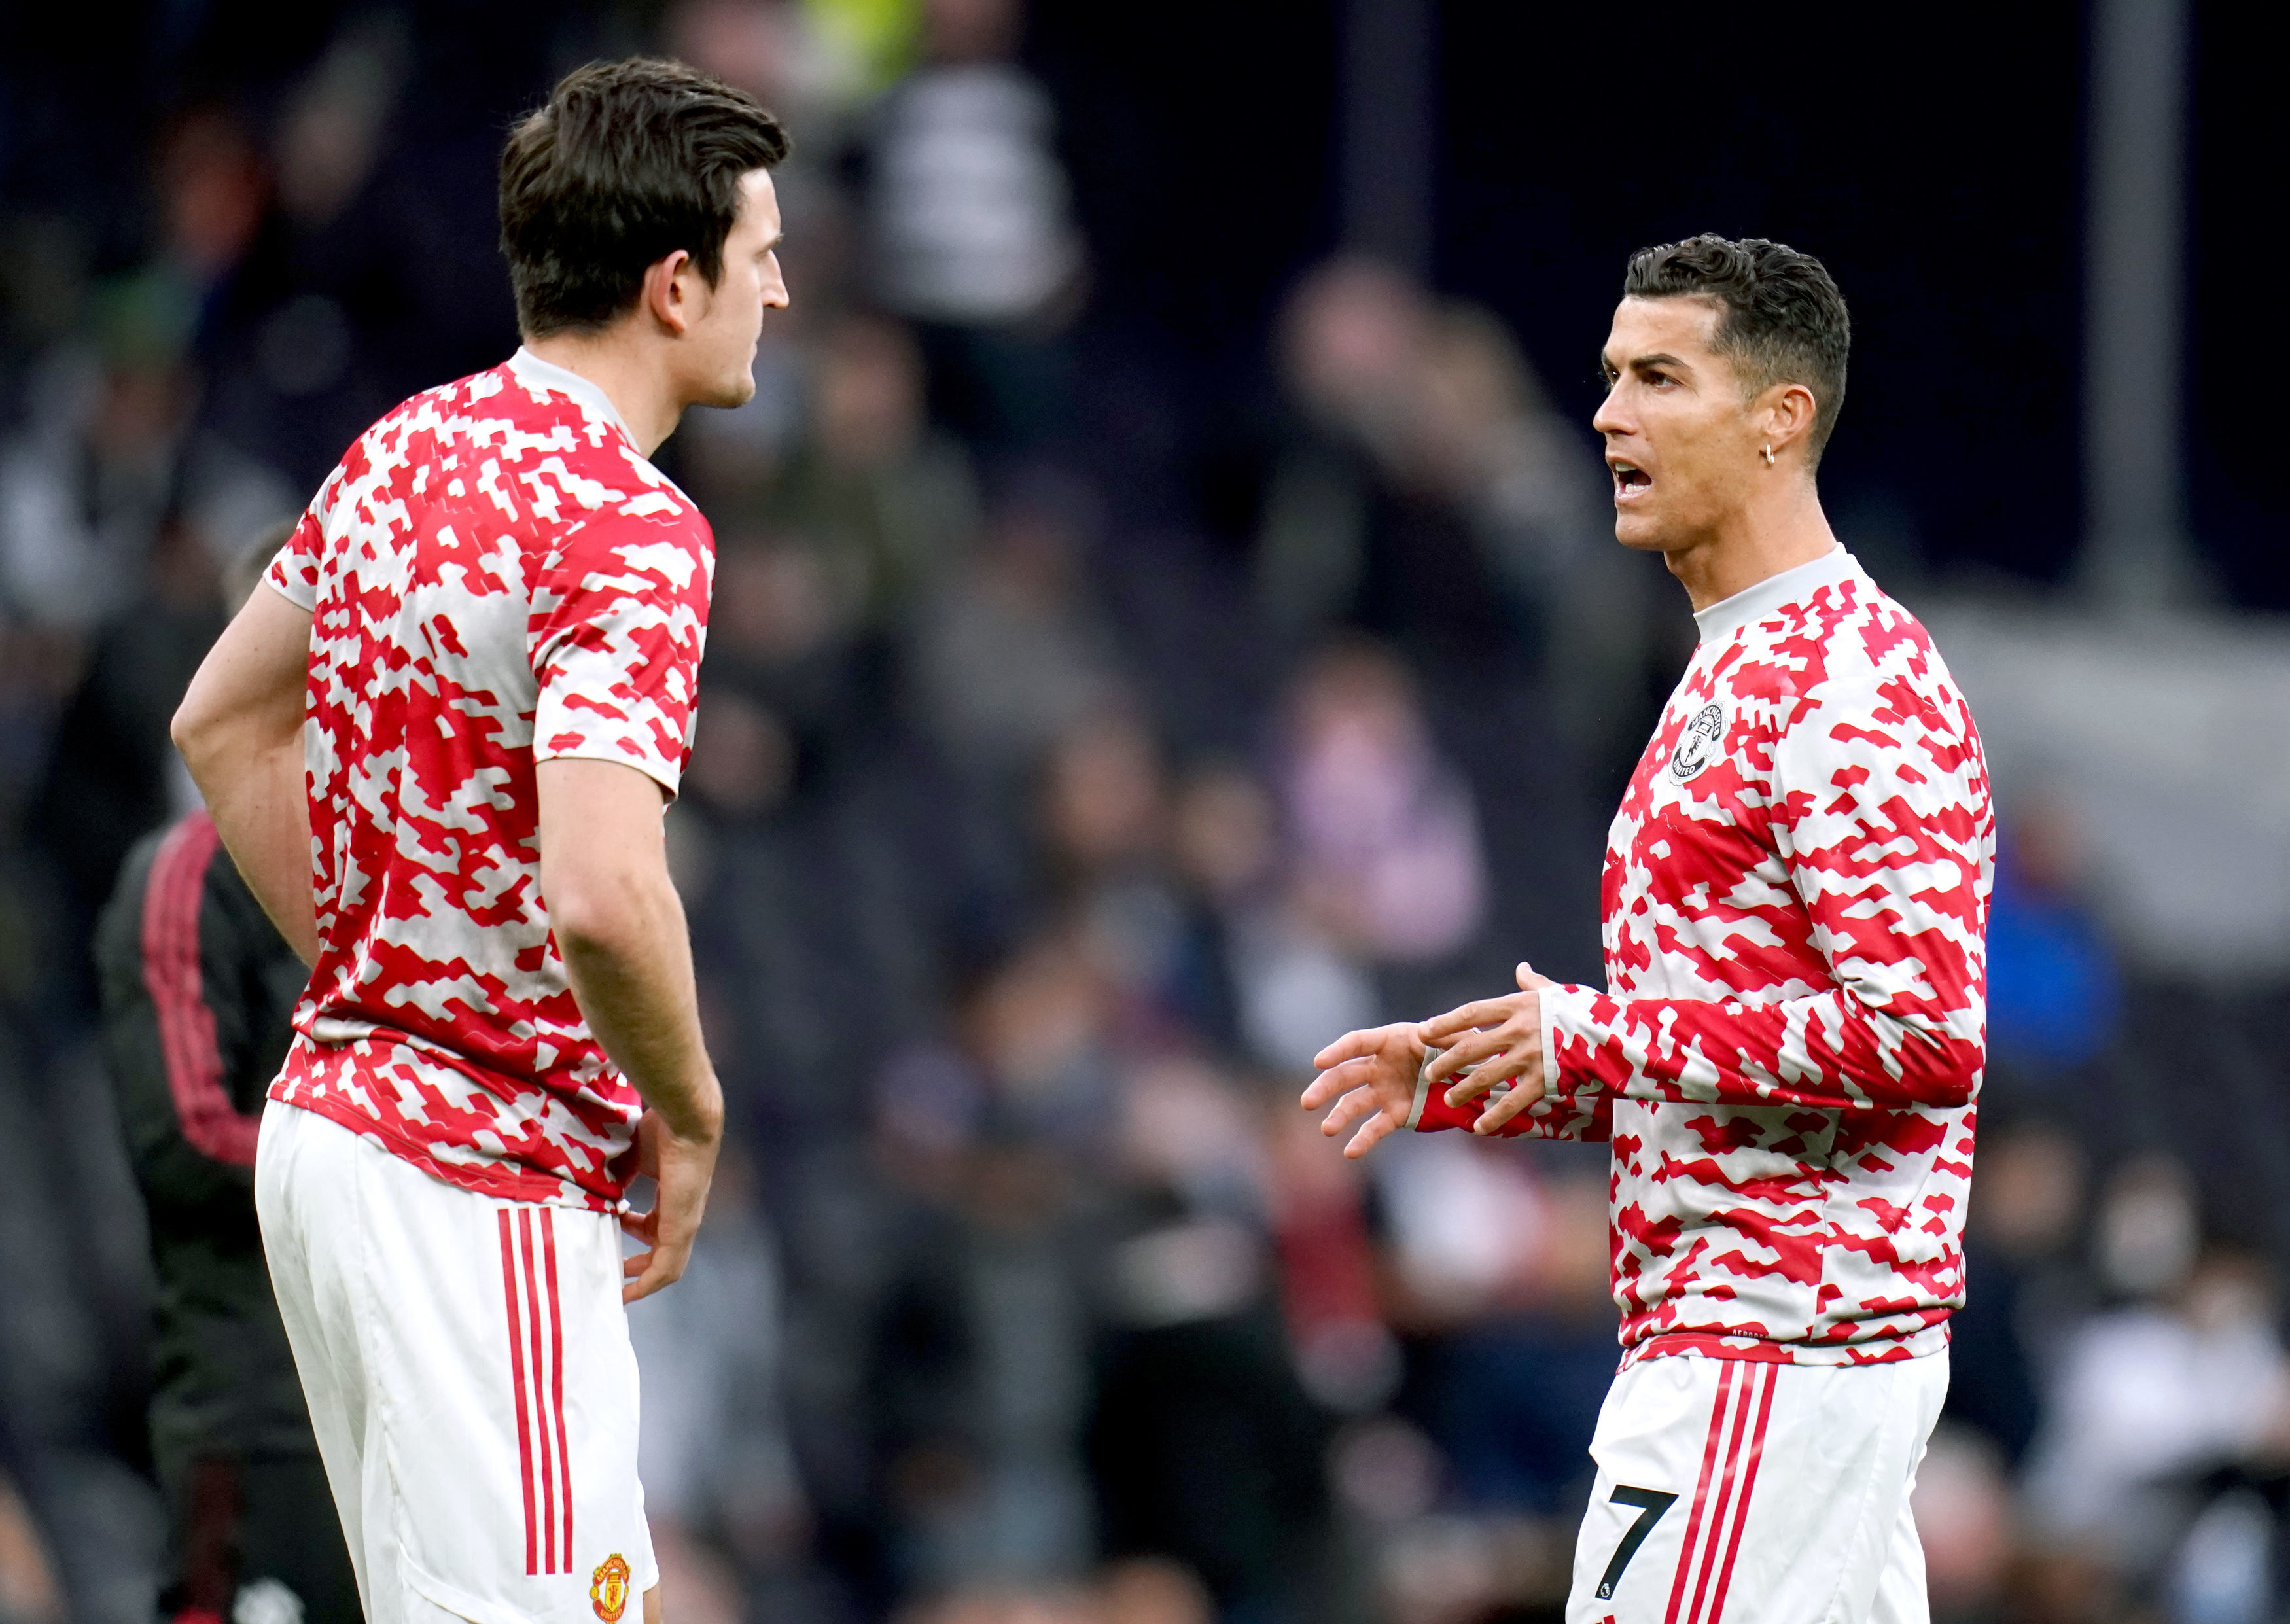 Manchester United: Man United captain Harry Maguire rubbishes reports of rifts between him and Cristiano Ronaldo amid 'change of Captaincy' rumours